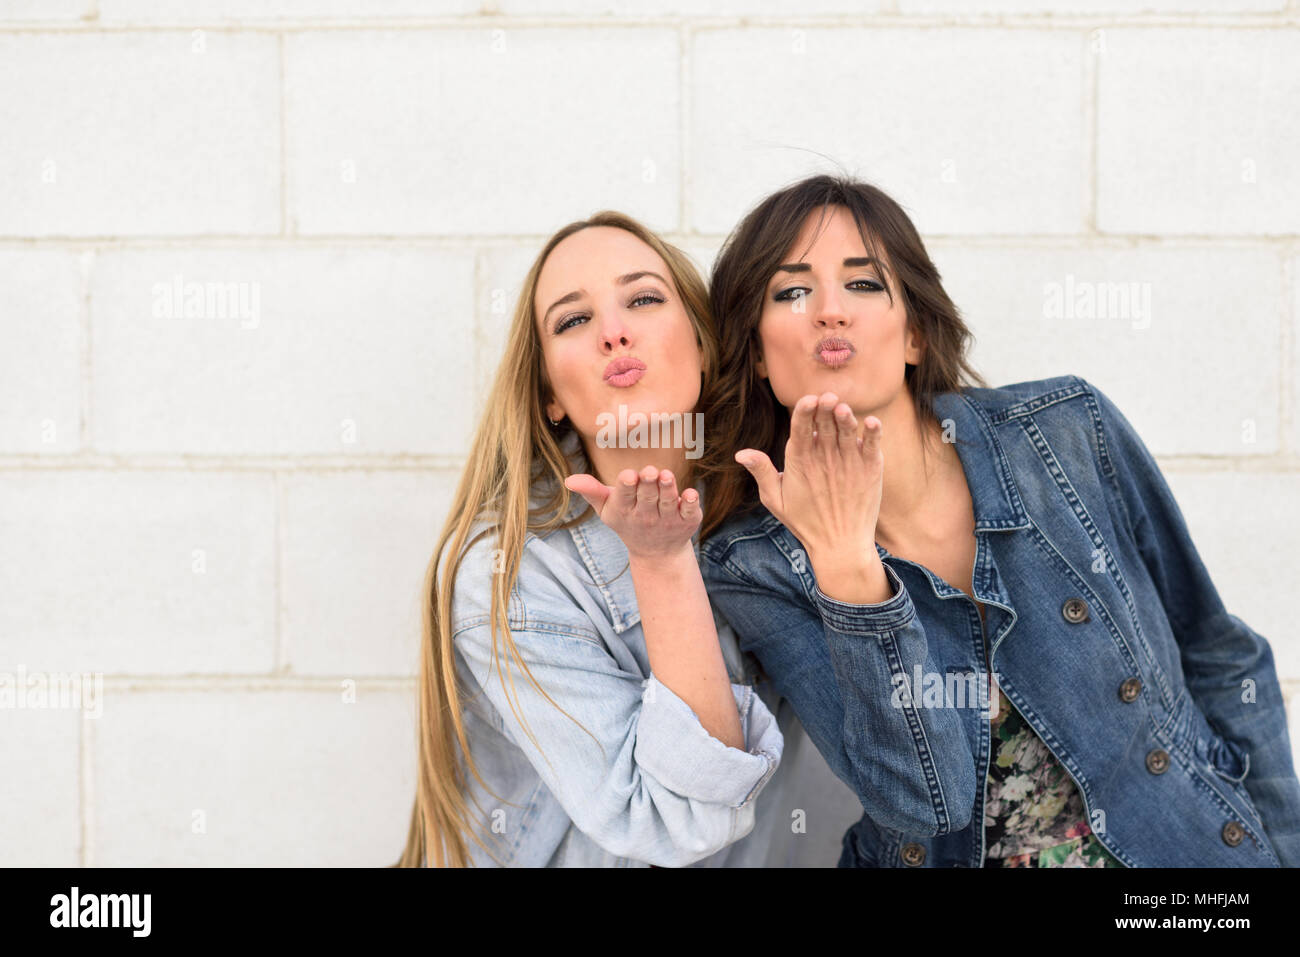 Two young women blowing a kiss on urban wall outdoors. Stock Photo